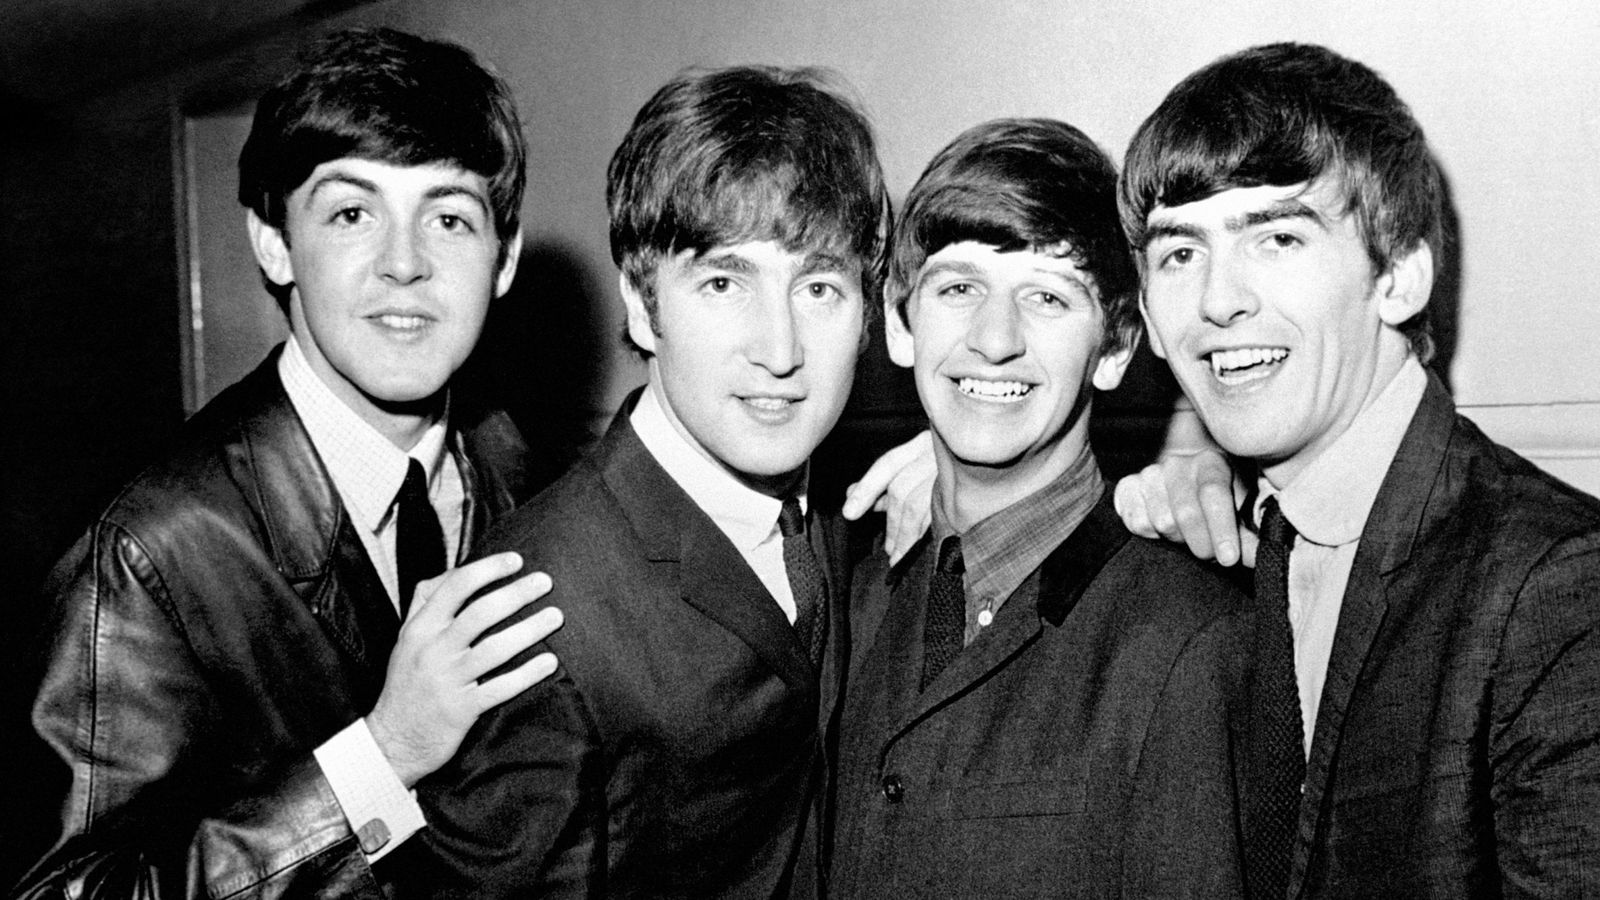 Paul McCartney reveals AI has been used to create 'the last Beatles record' - featuring John Lennon's vocals